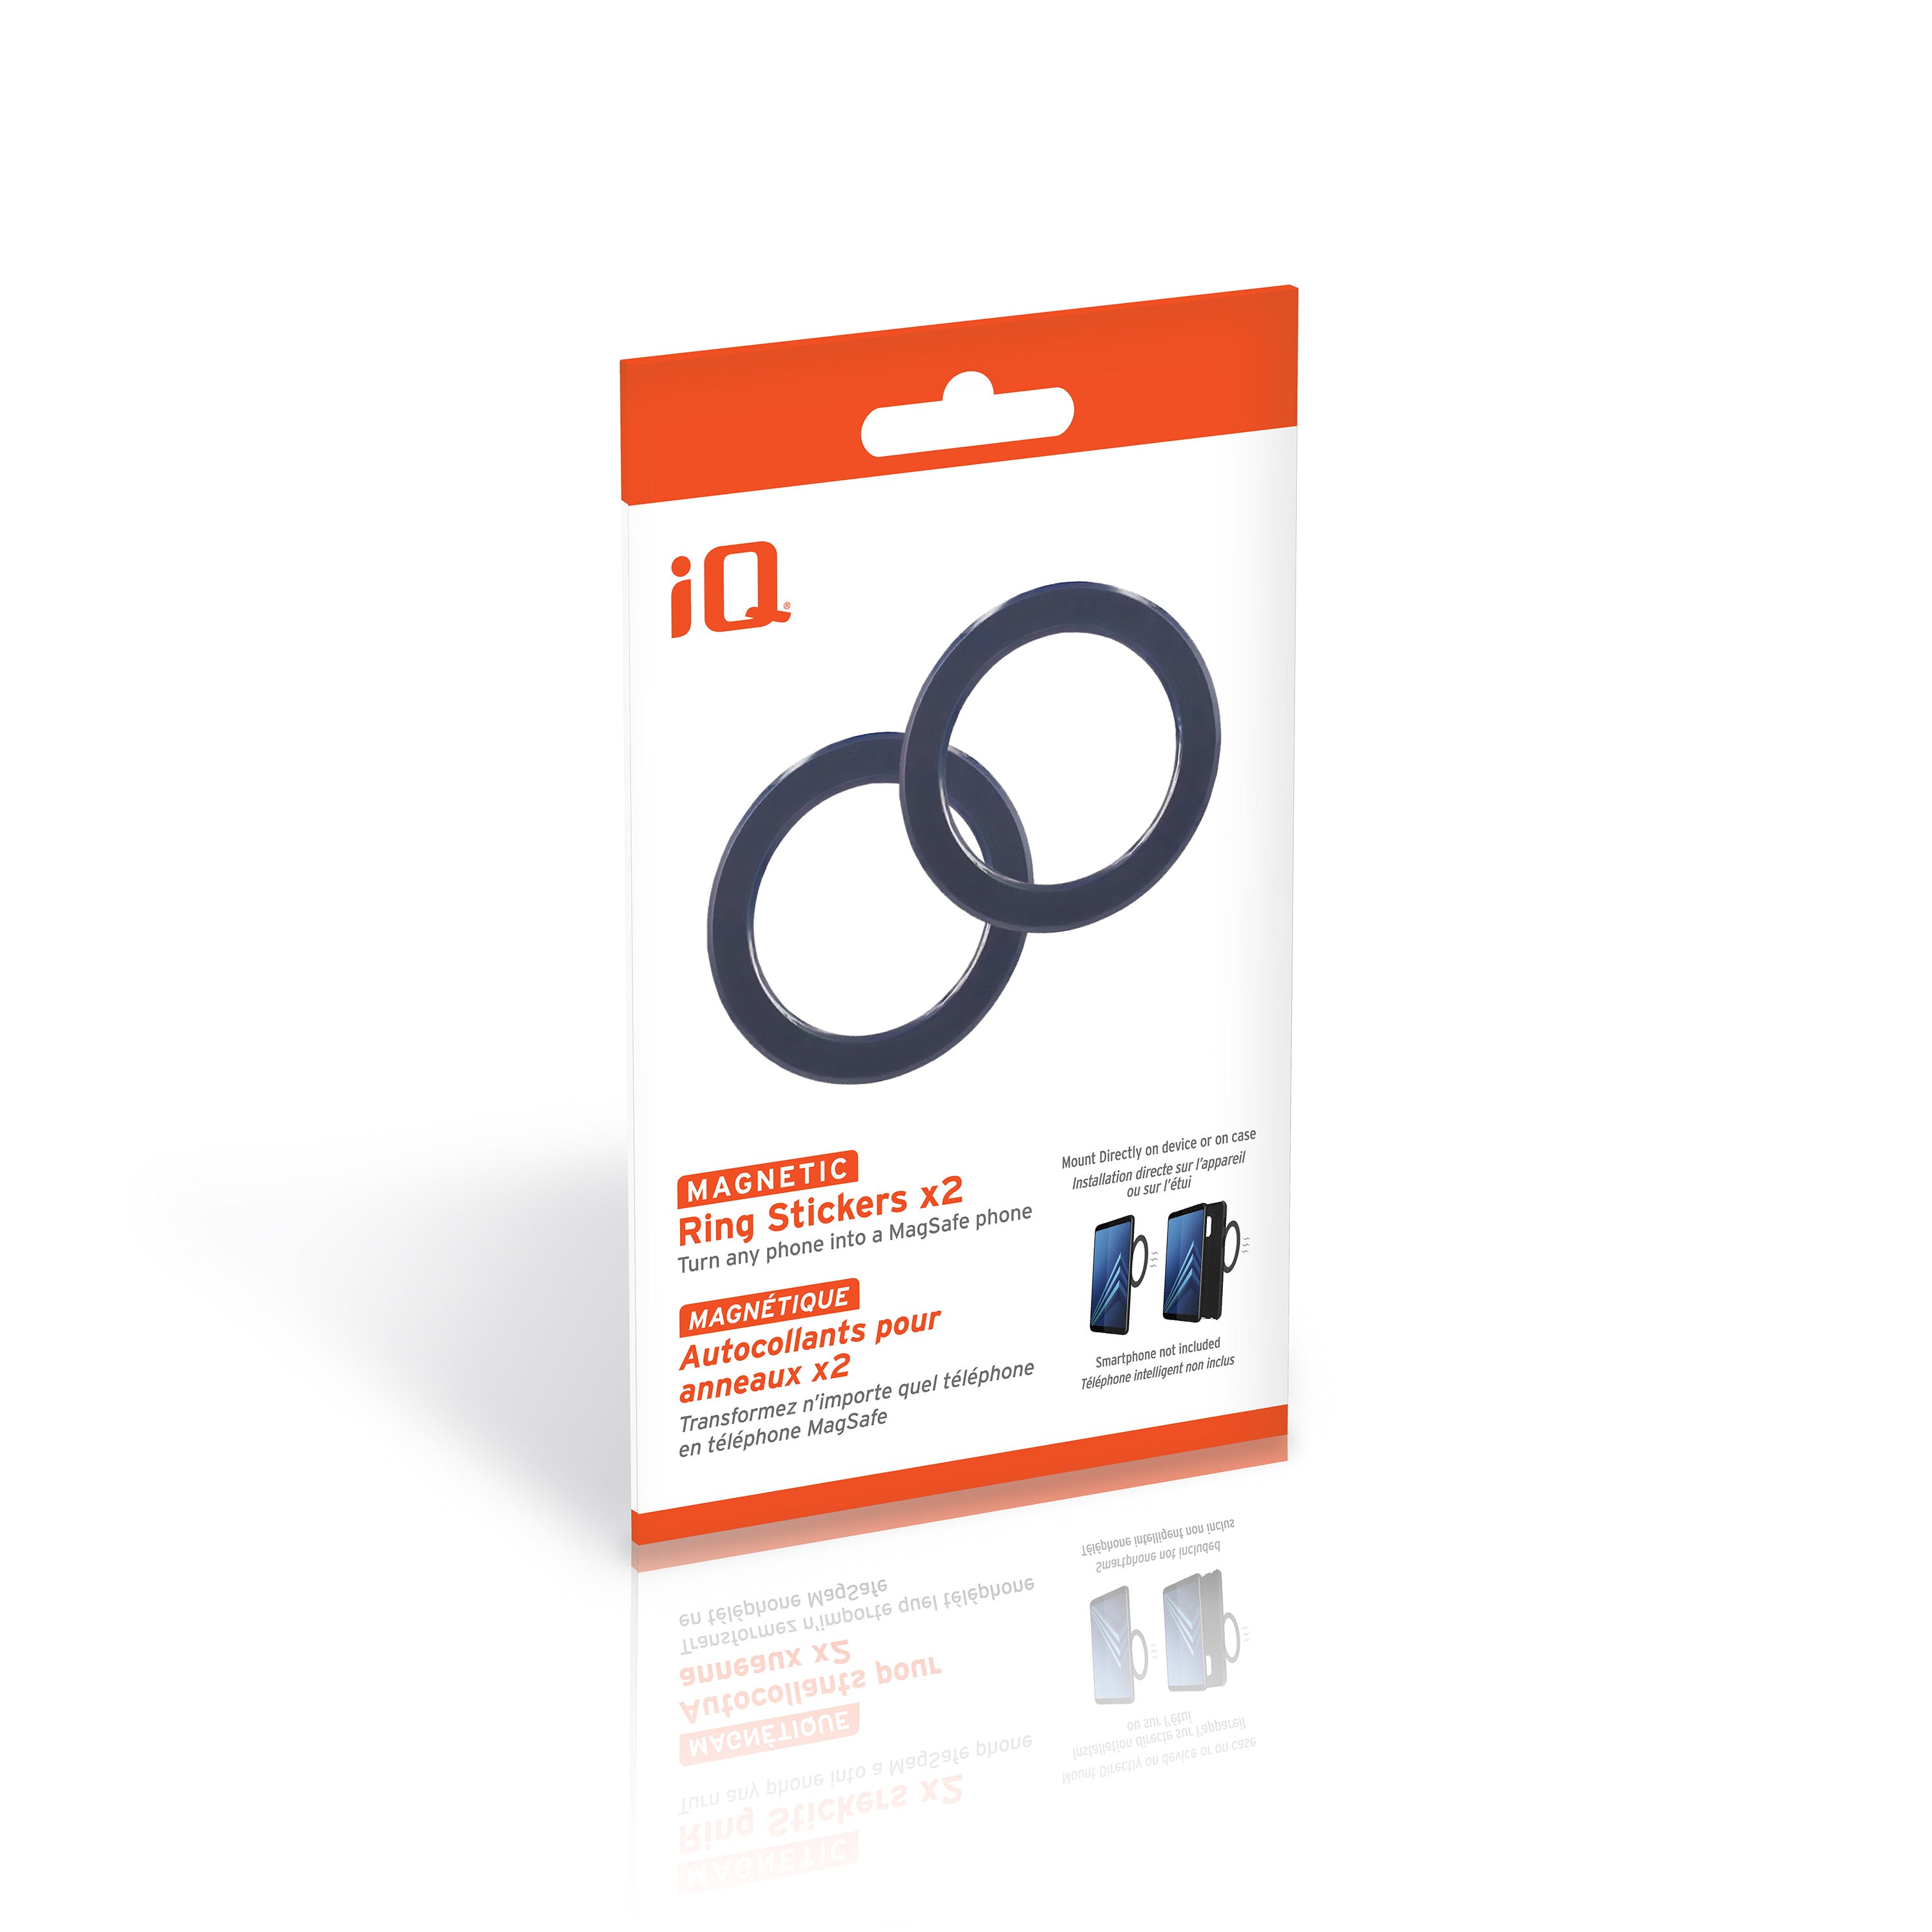 iQ Magnetic Ring Stickers